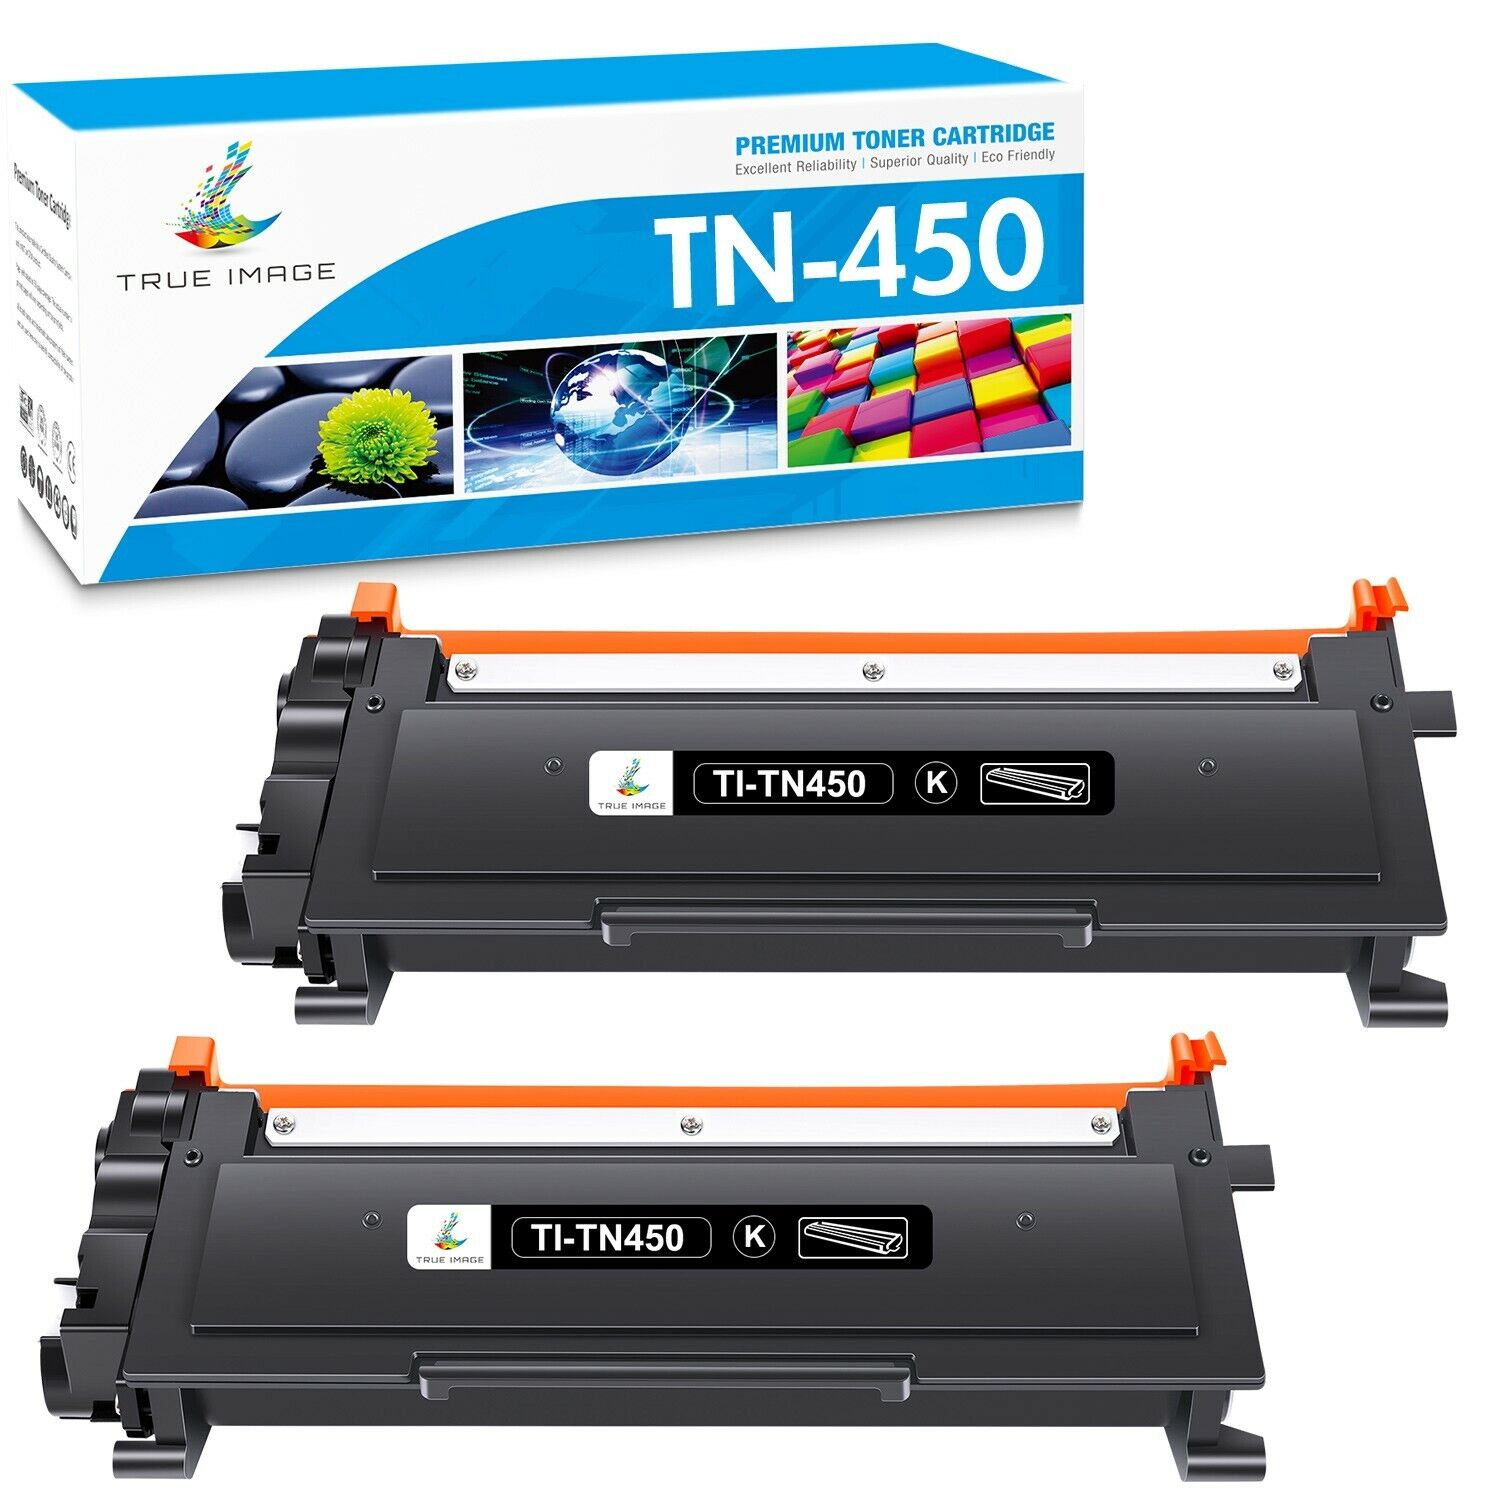 2x Toner Compatible With Brother TN450 HL-2270DW 2275DW 2280DW HL-2240 MFC-7360N